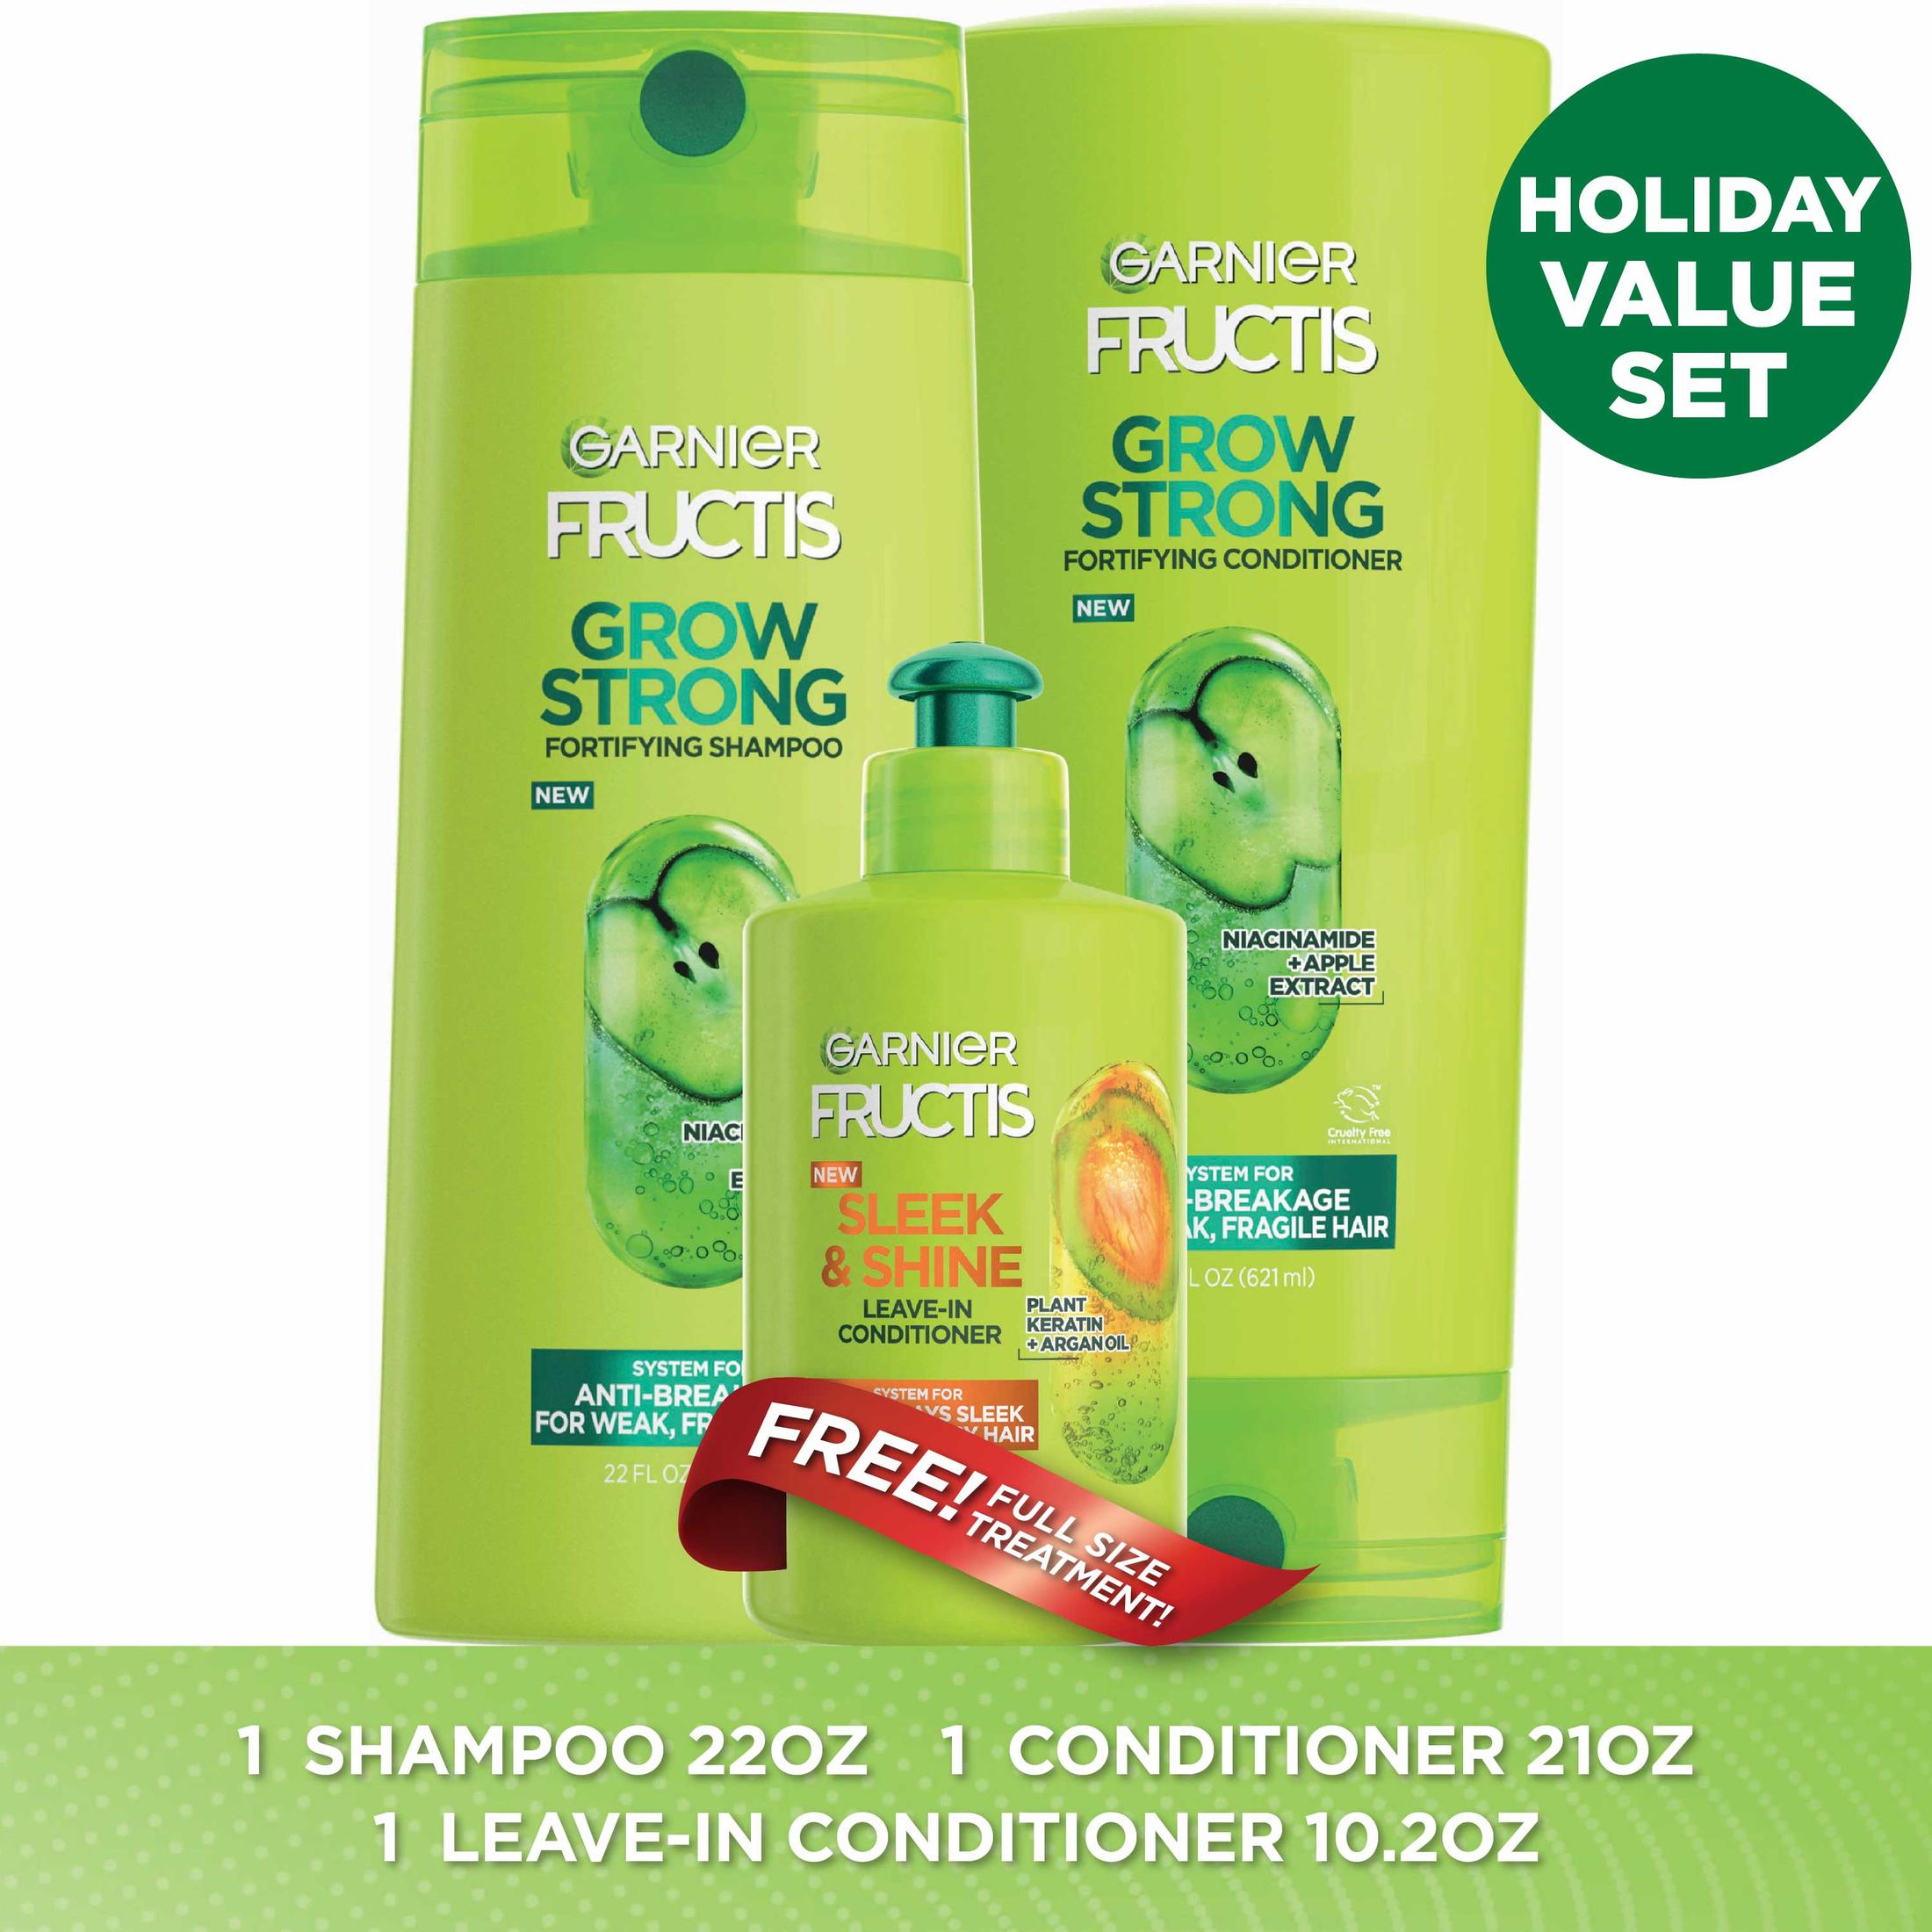 ($16 Value) Garnier Fructis Grow Strong Shampoo Conditioner and Treatment Gift Set, Holiday Kit - image 1 of 4